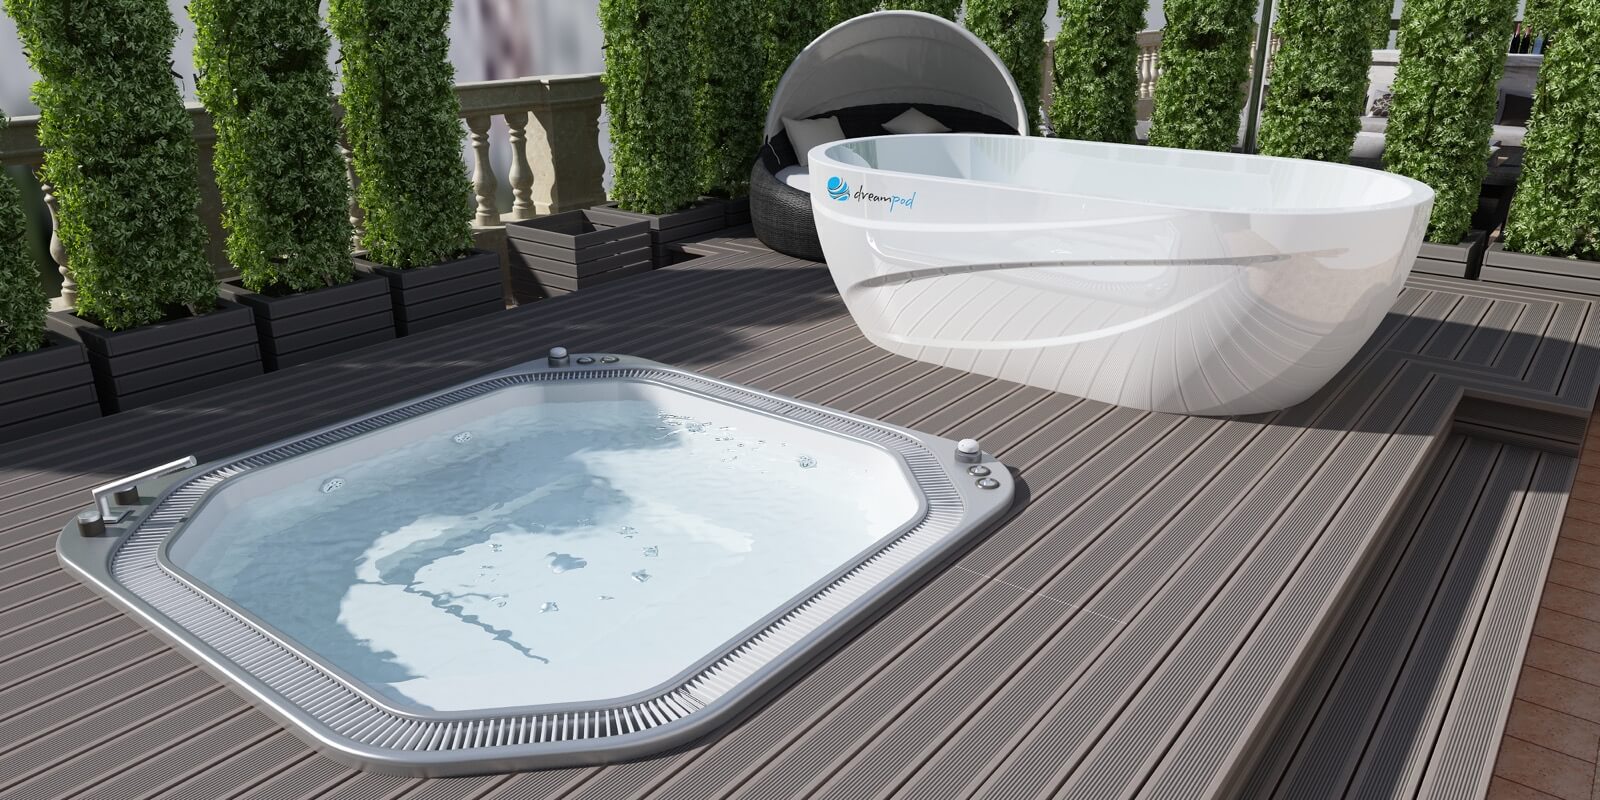 Dreampod cold plunge on deck with hot tub